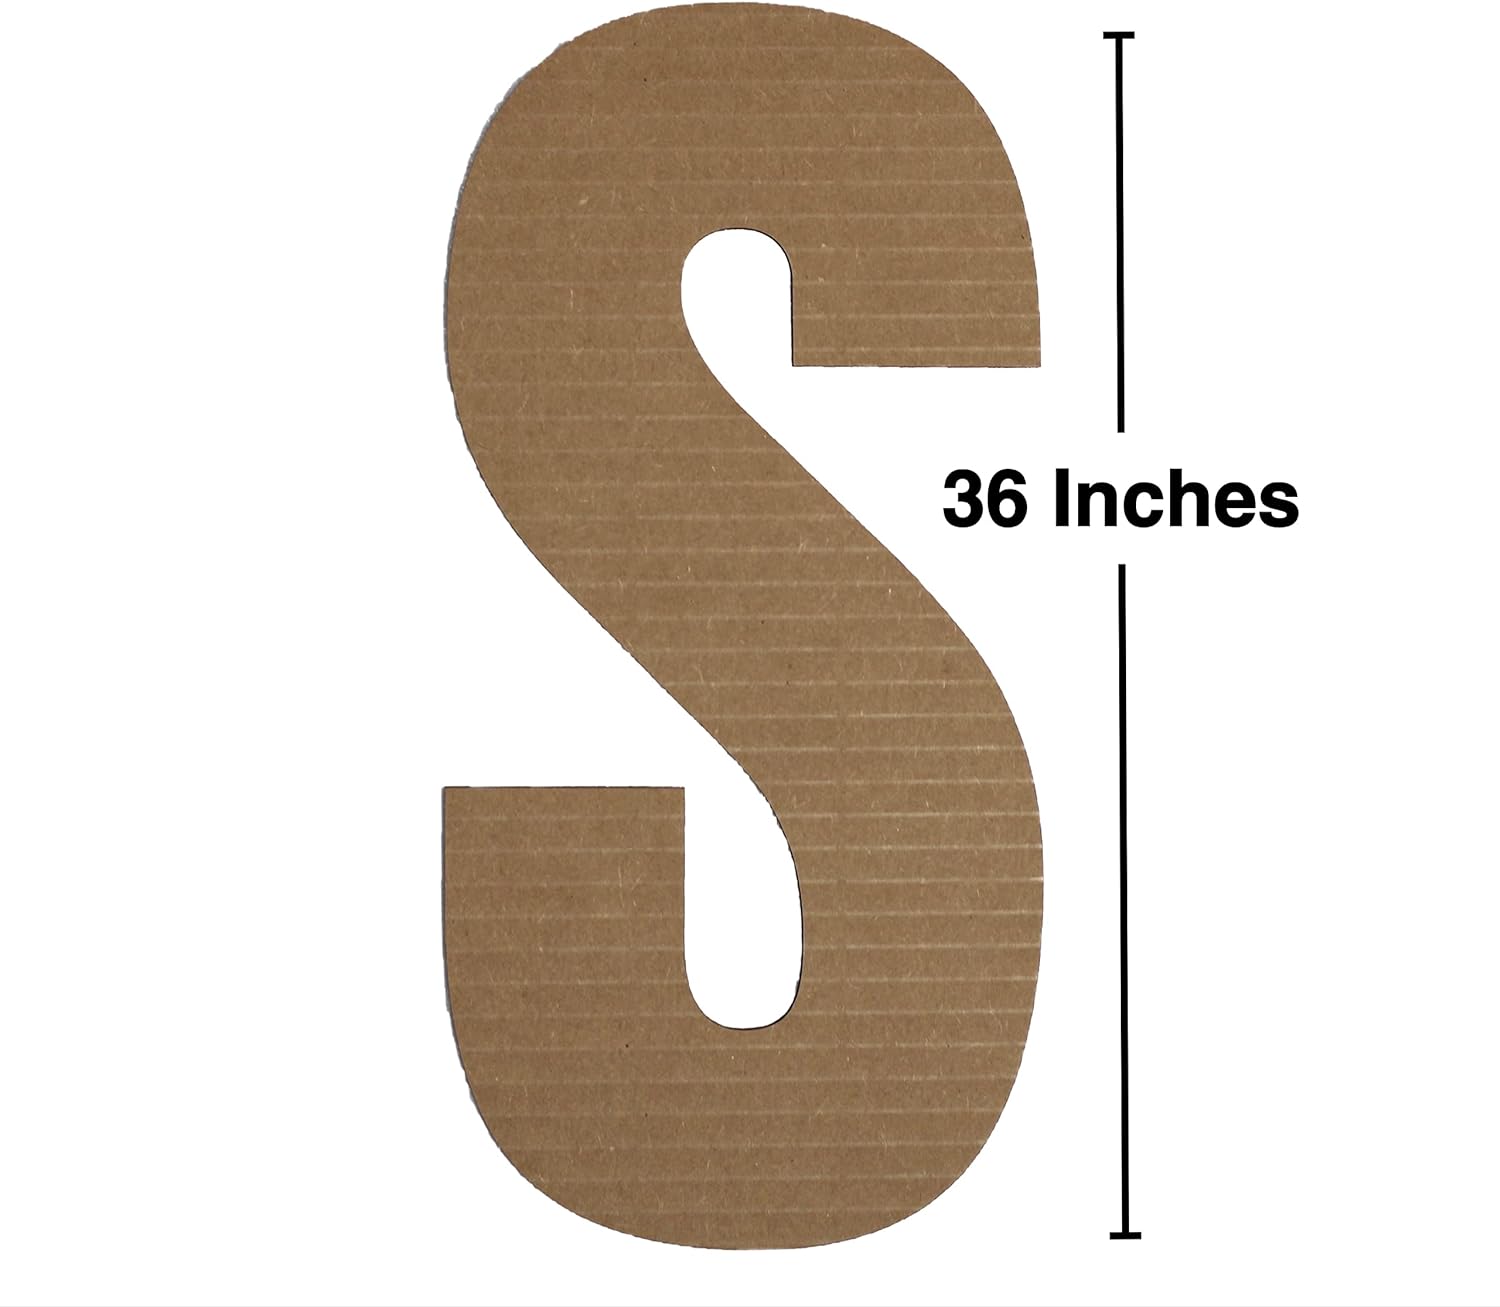 Large Flat Cardboard Letters, Choose Your Own Letters And Numbers, Large  Flat Cardboard Numbers, Decorative Letters, Giant Letters For Wall Decor, Craft Letters